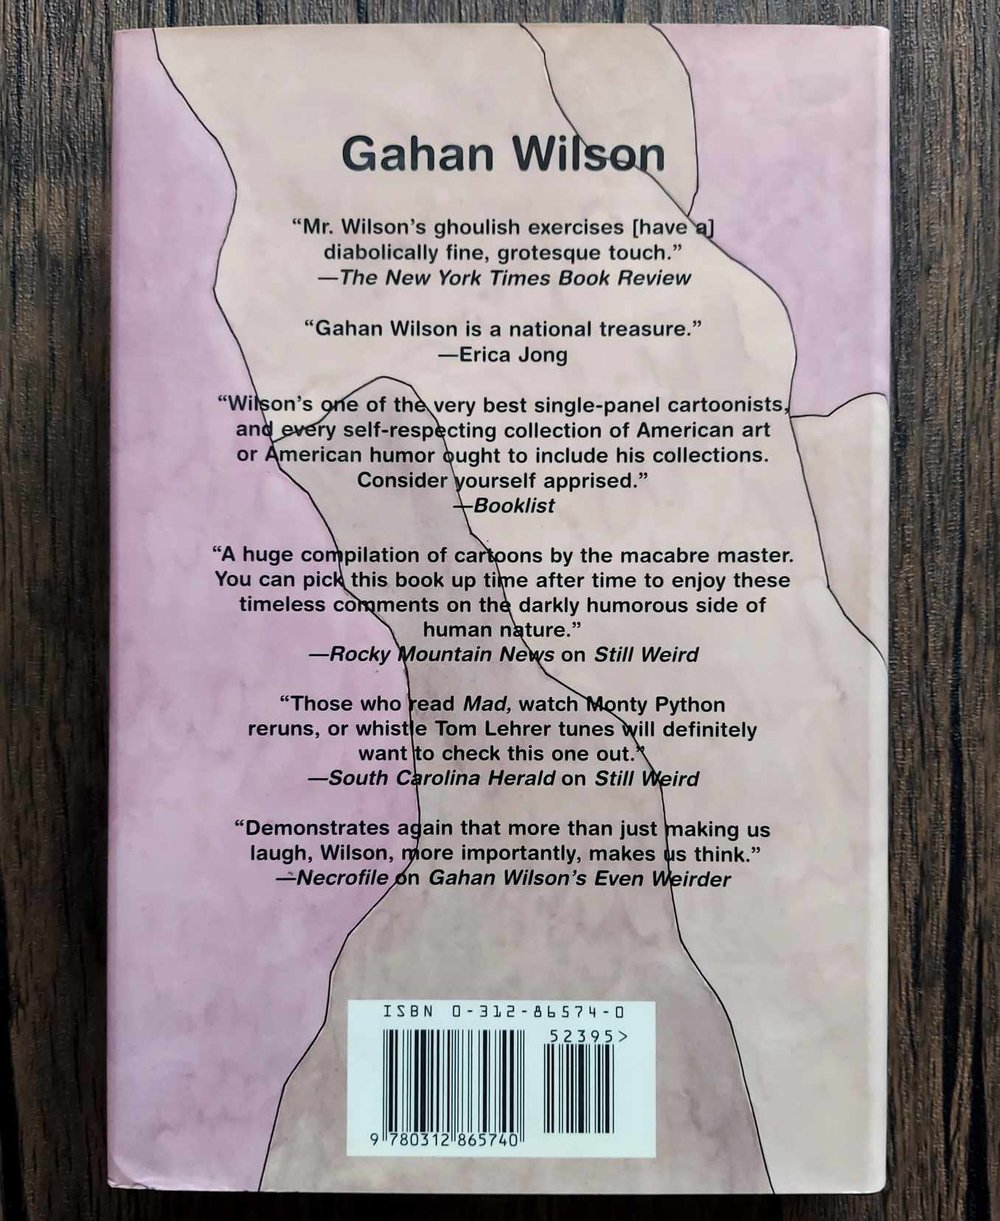 The Cleft and Other Odd Tales, by Gahan Wilson